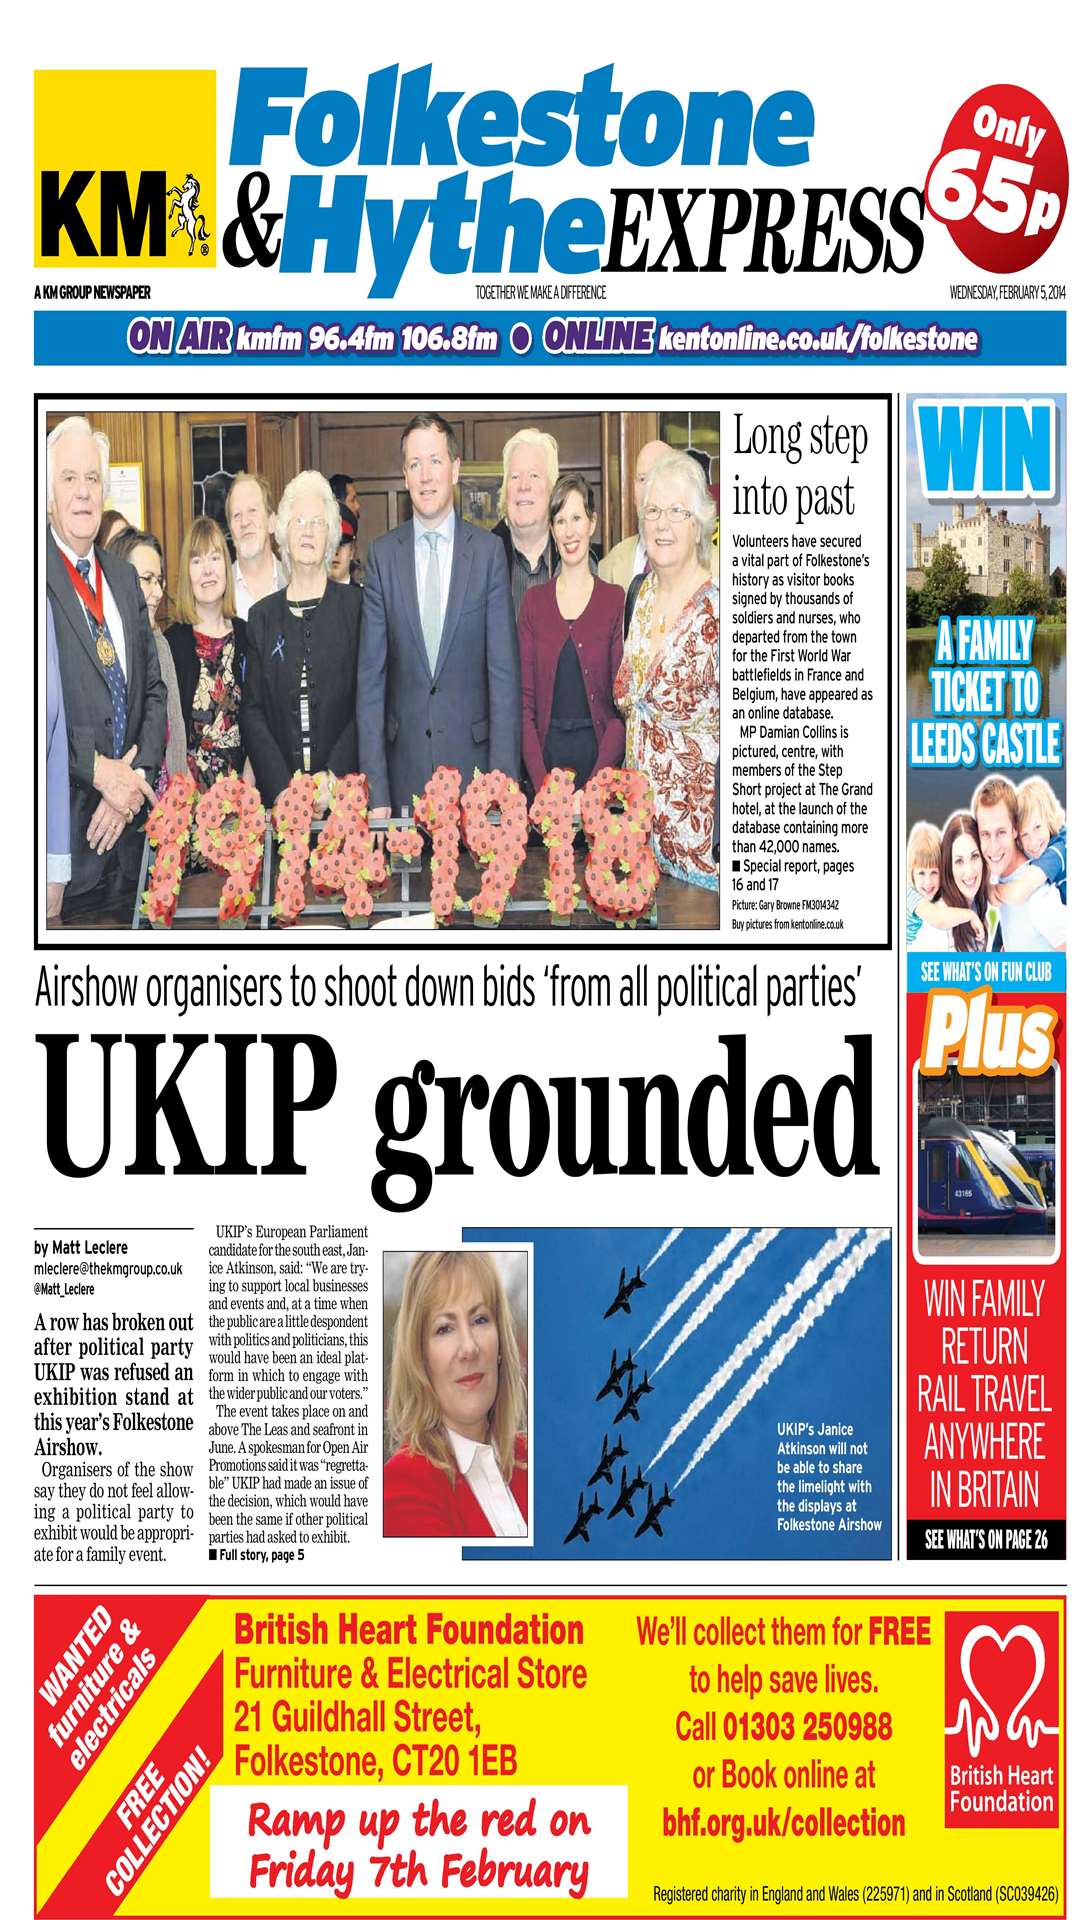 This week's front page of the Folkestone & Hythe Express - out now for 65p